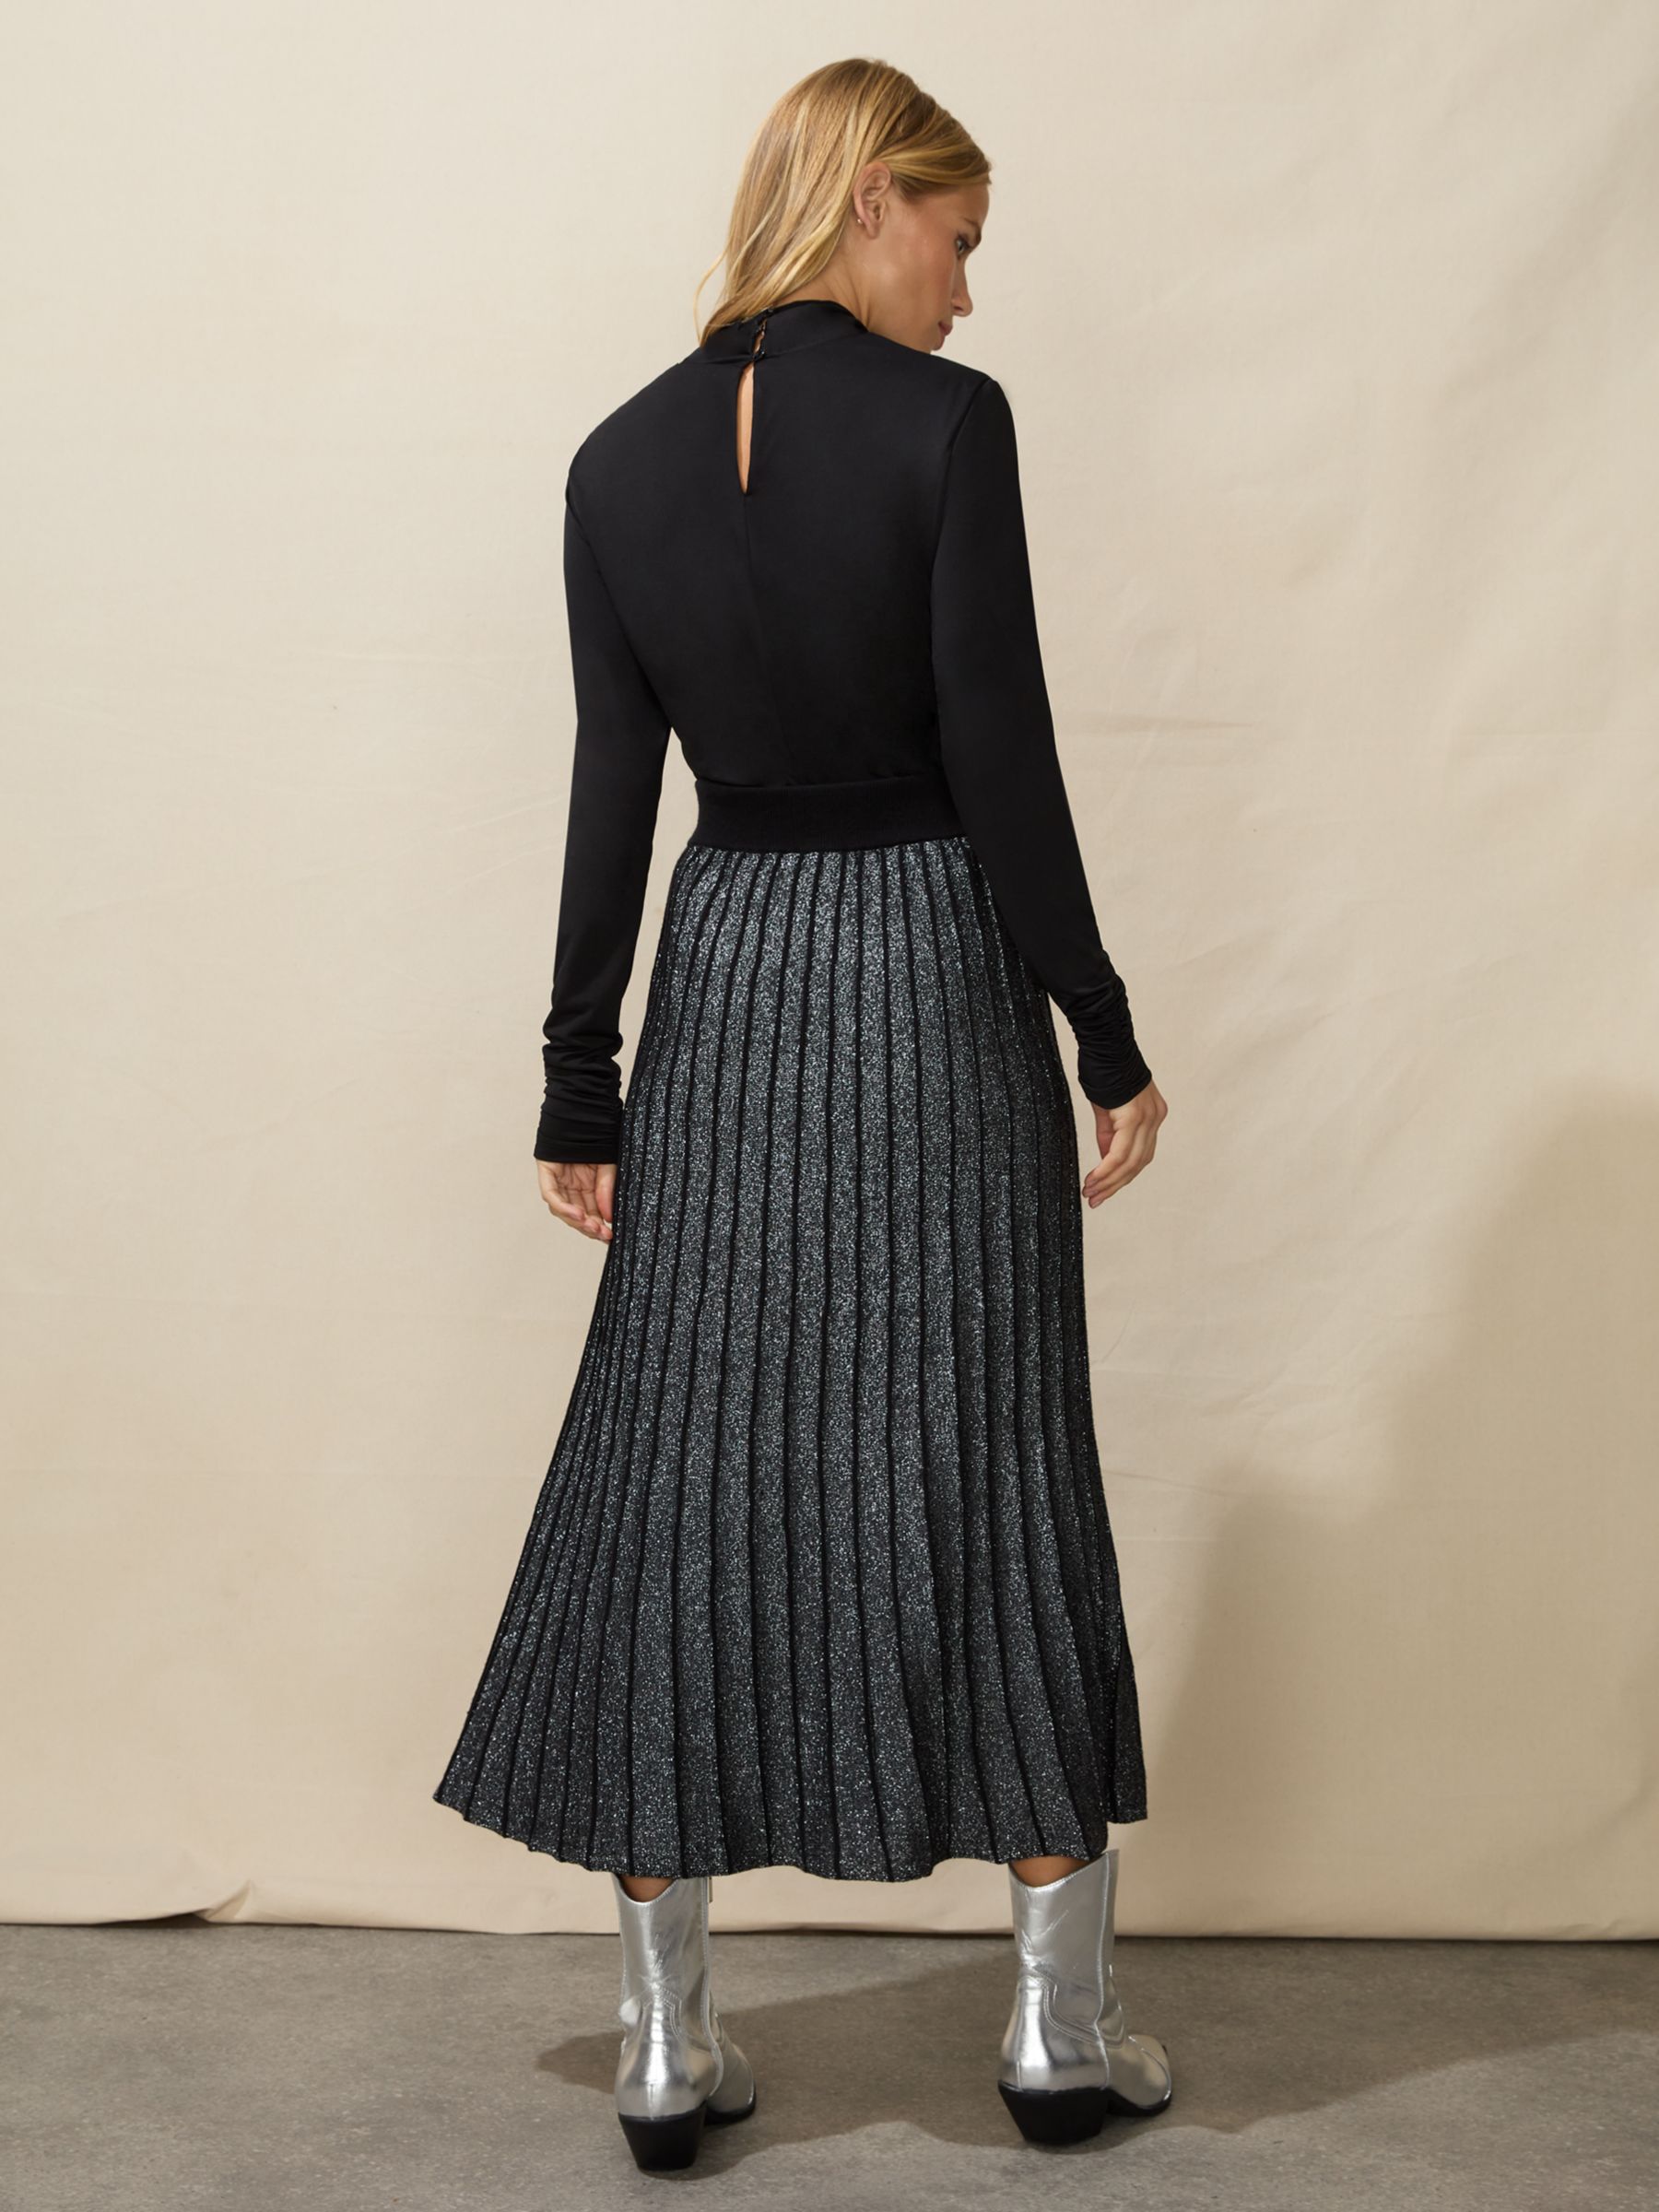 Buy Ro&Zo Knit Pleated Midi Skirt, Black/Silver Online at johnlewis.com